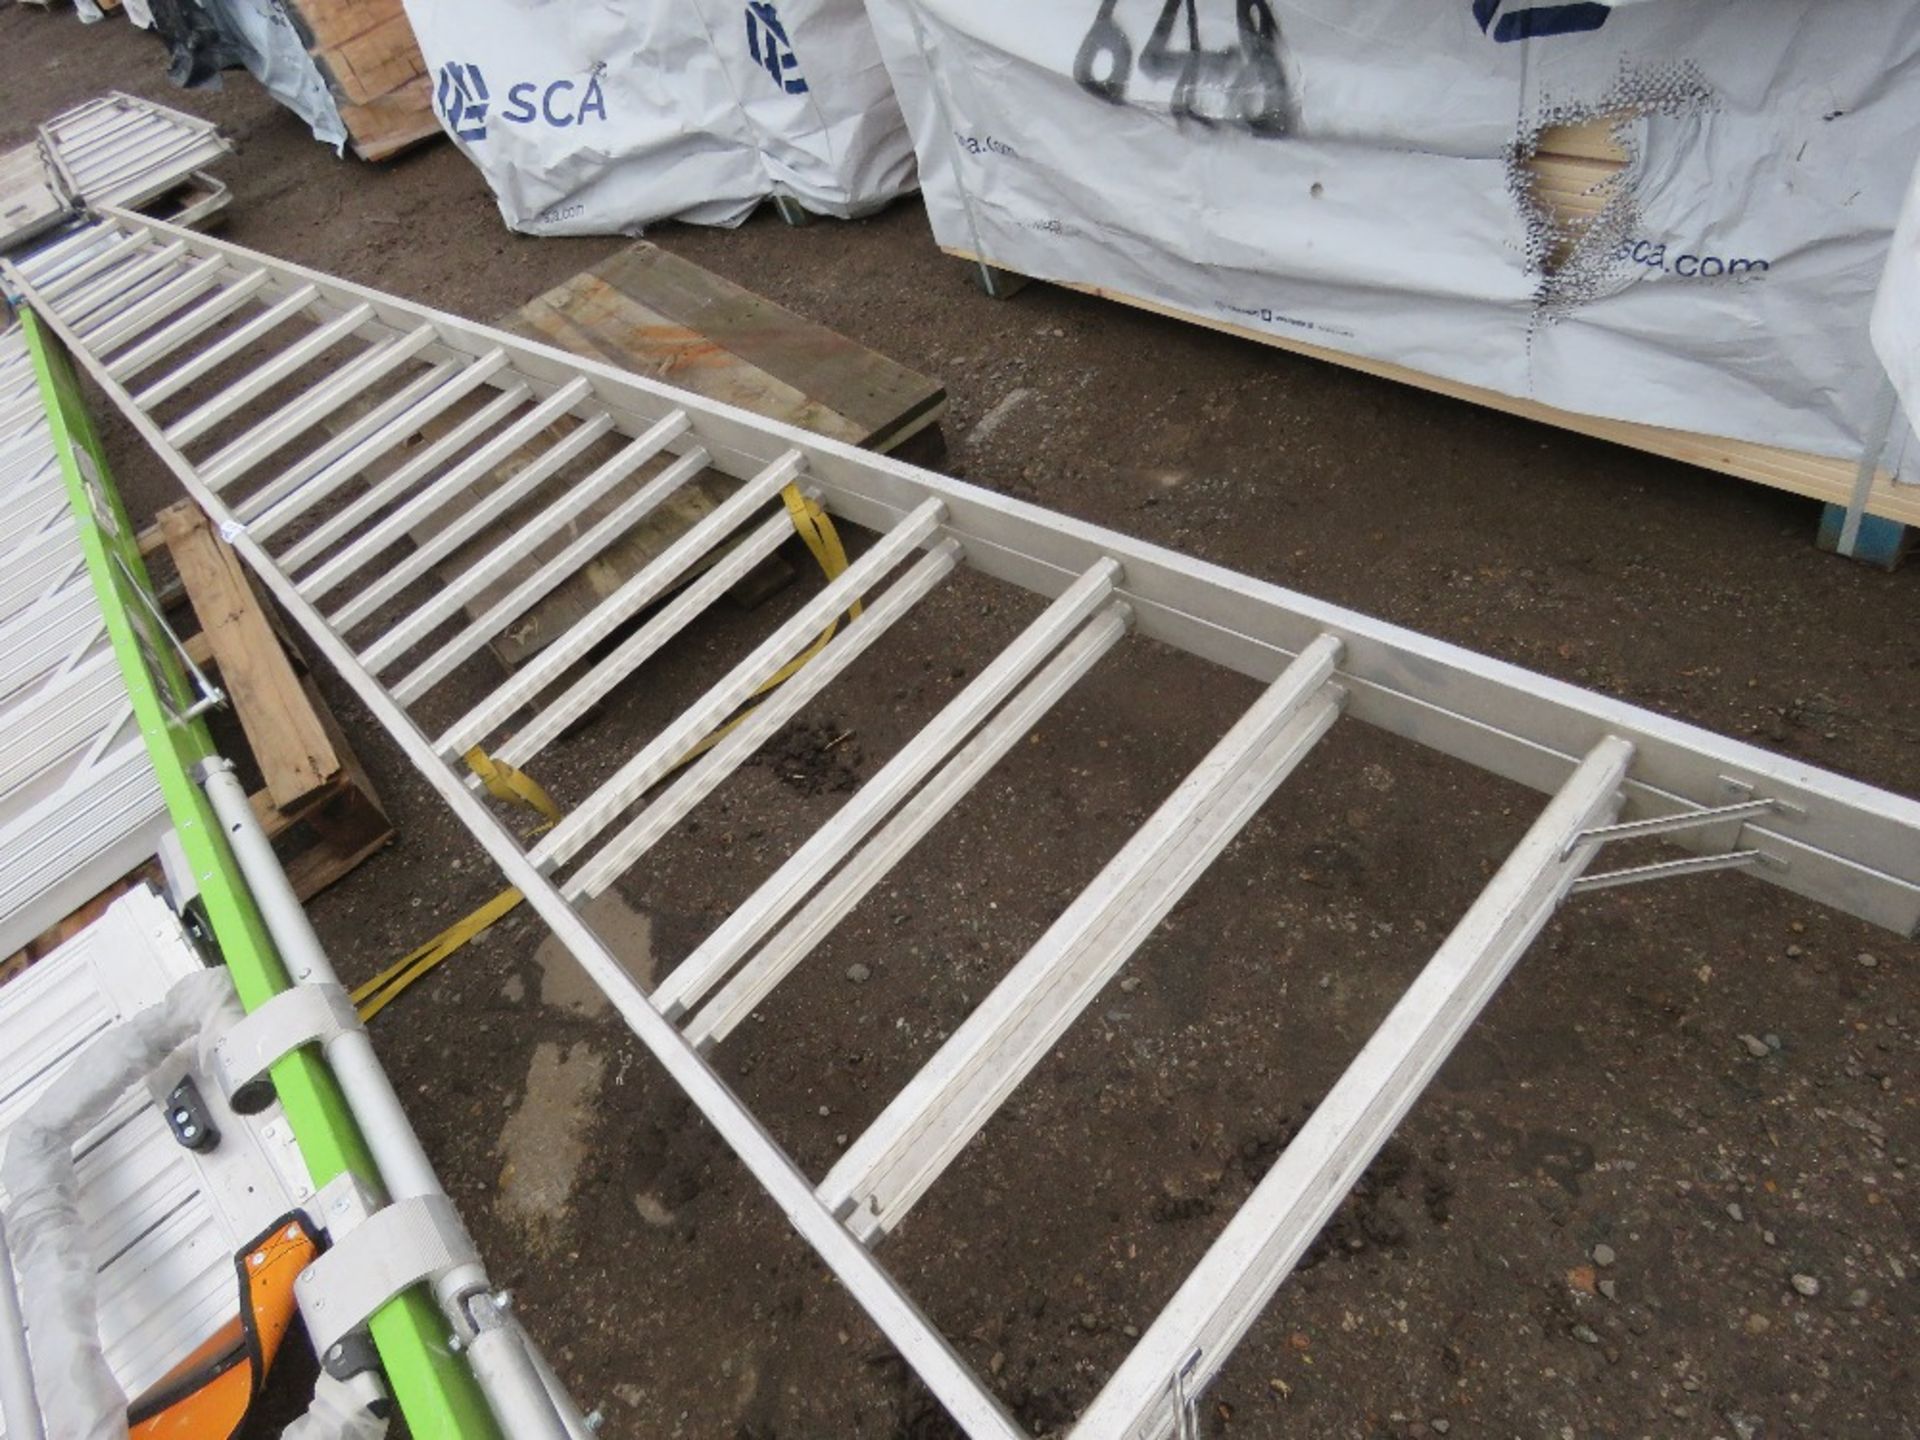 PAIR OF LARGE ALUMINIUM STEP LADDERS, 15FT OVERALL LENGTH APPROX. SOURCED FROM COMPANY LIQUIDATION. - Image 3 of 3